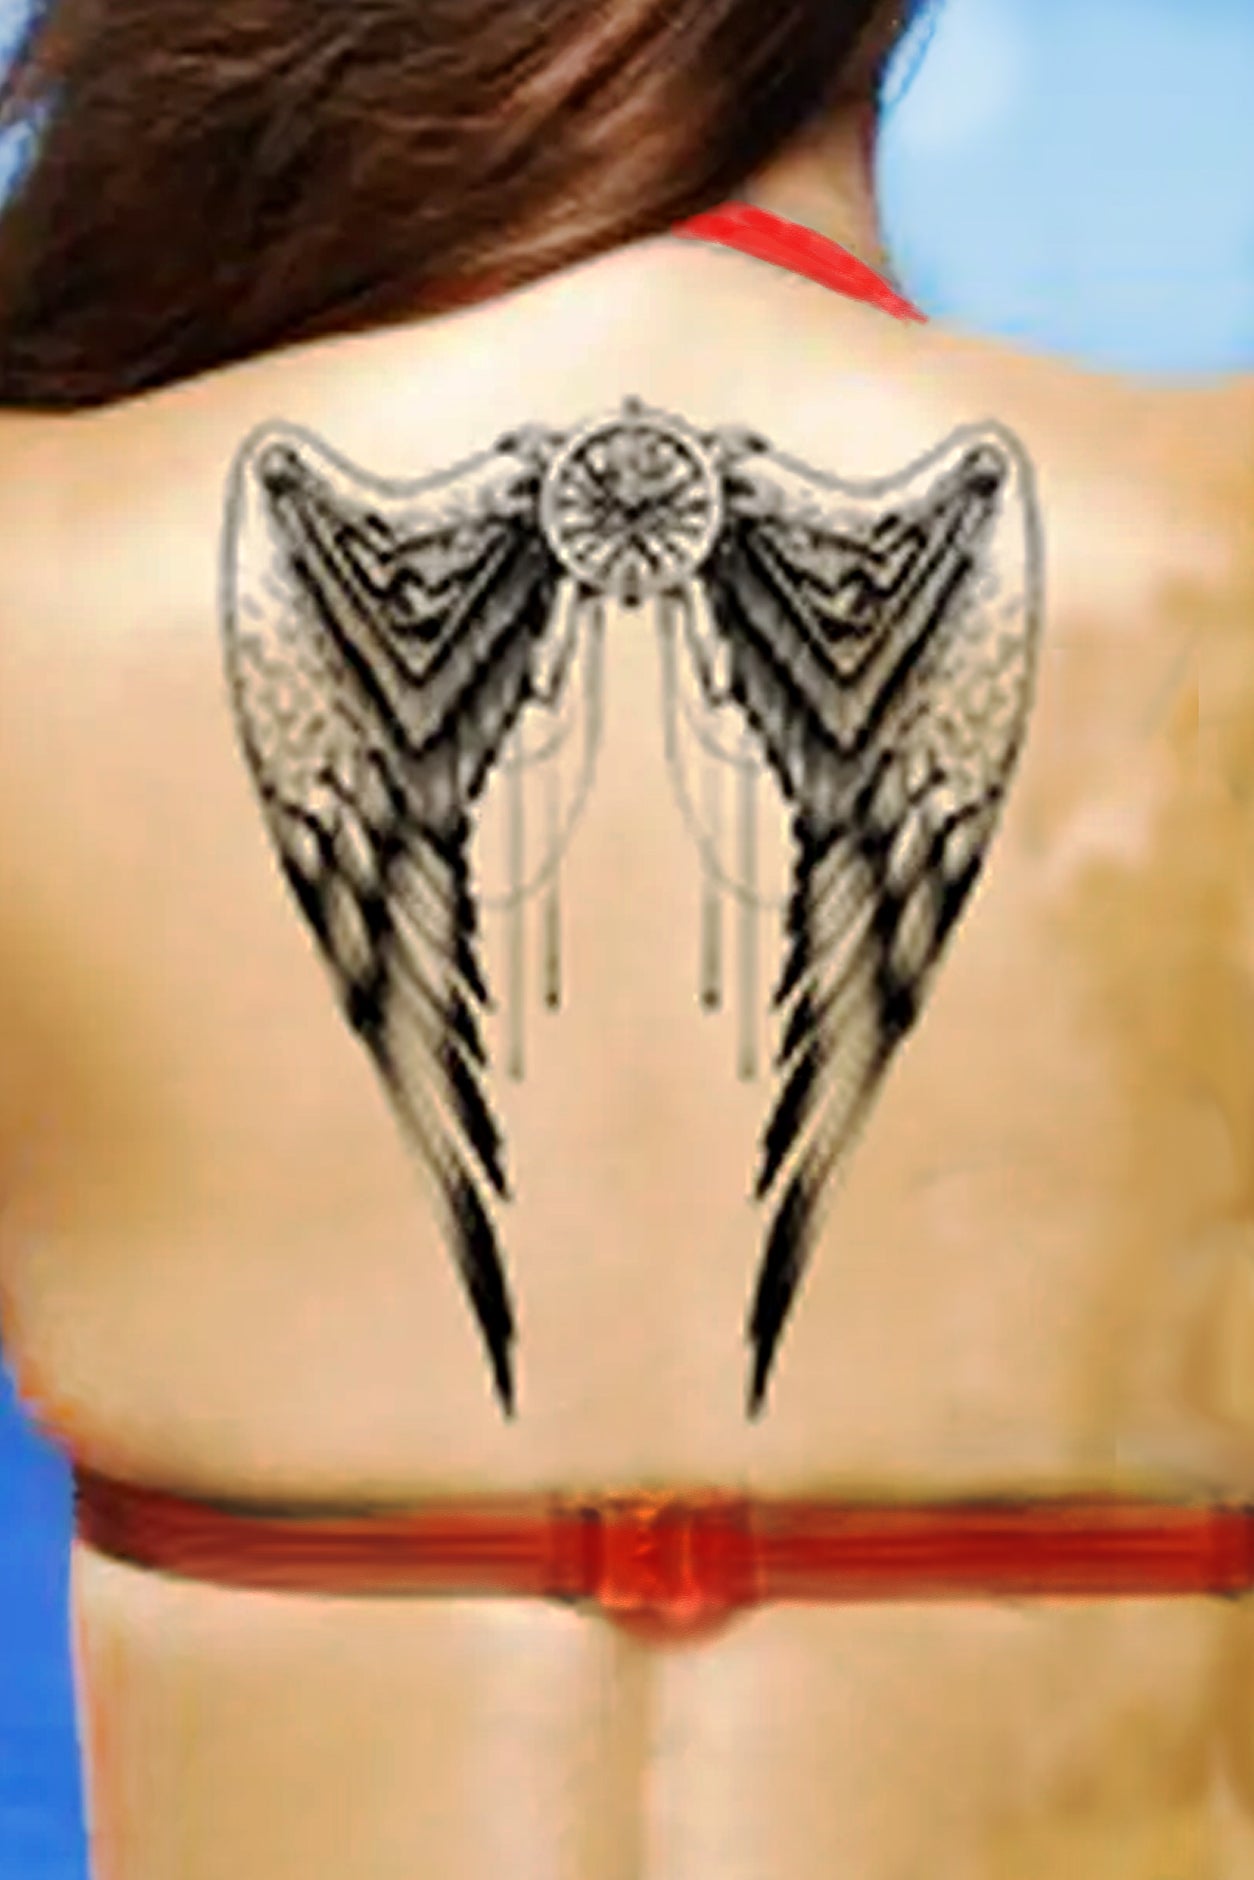 Angel wings tattoo located on the upper back.